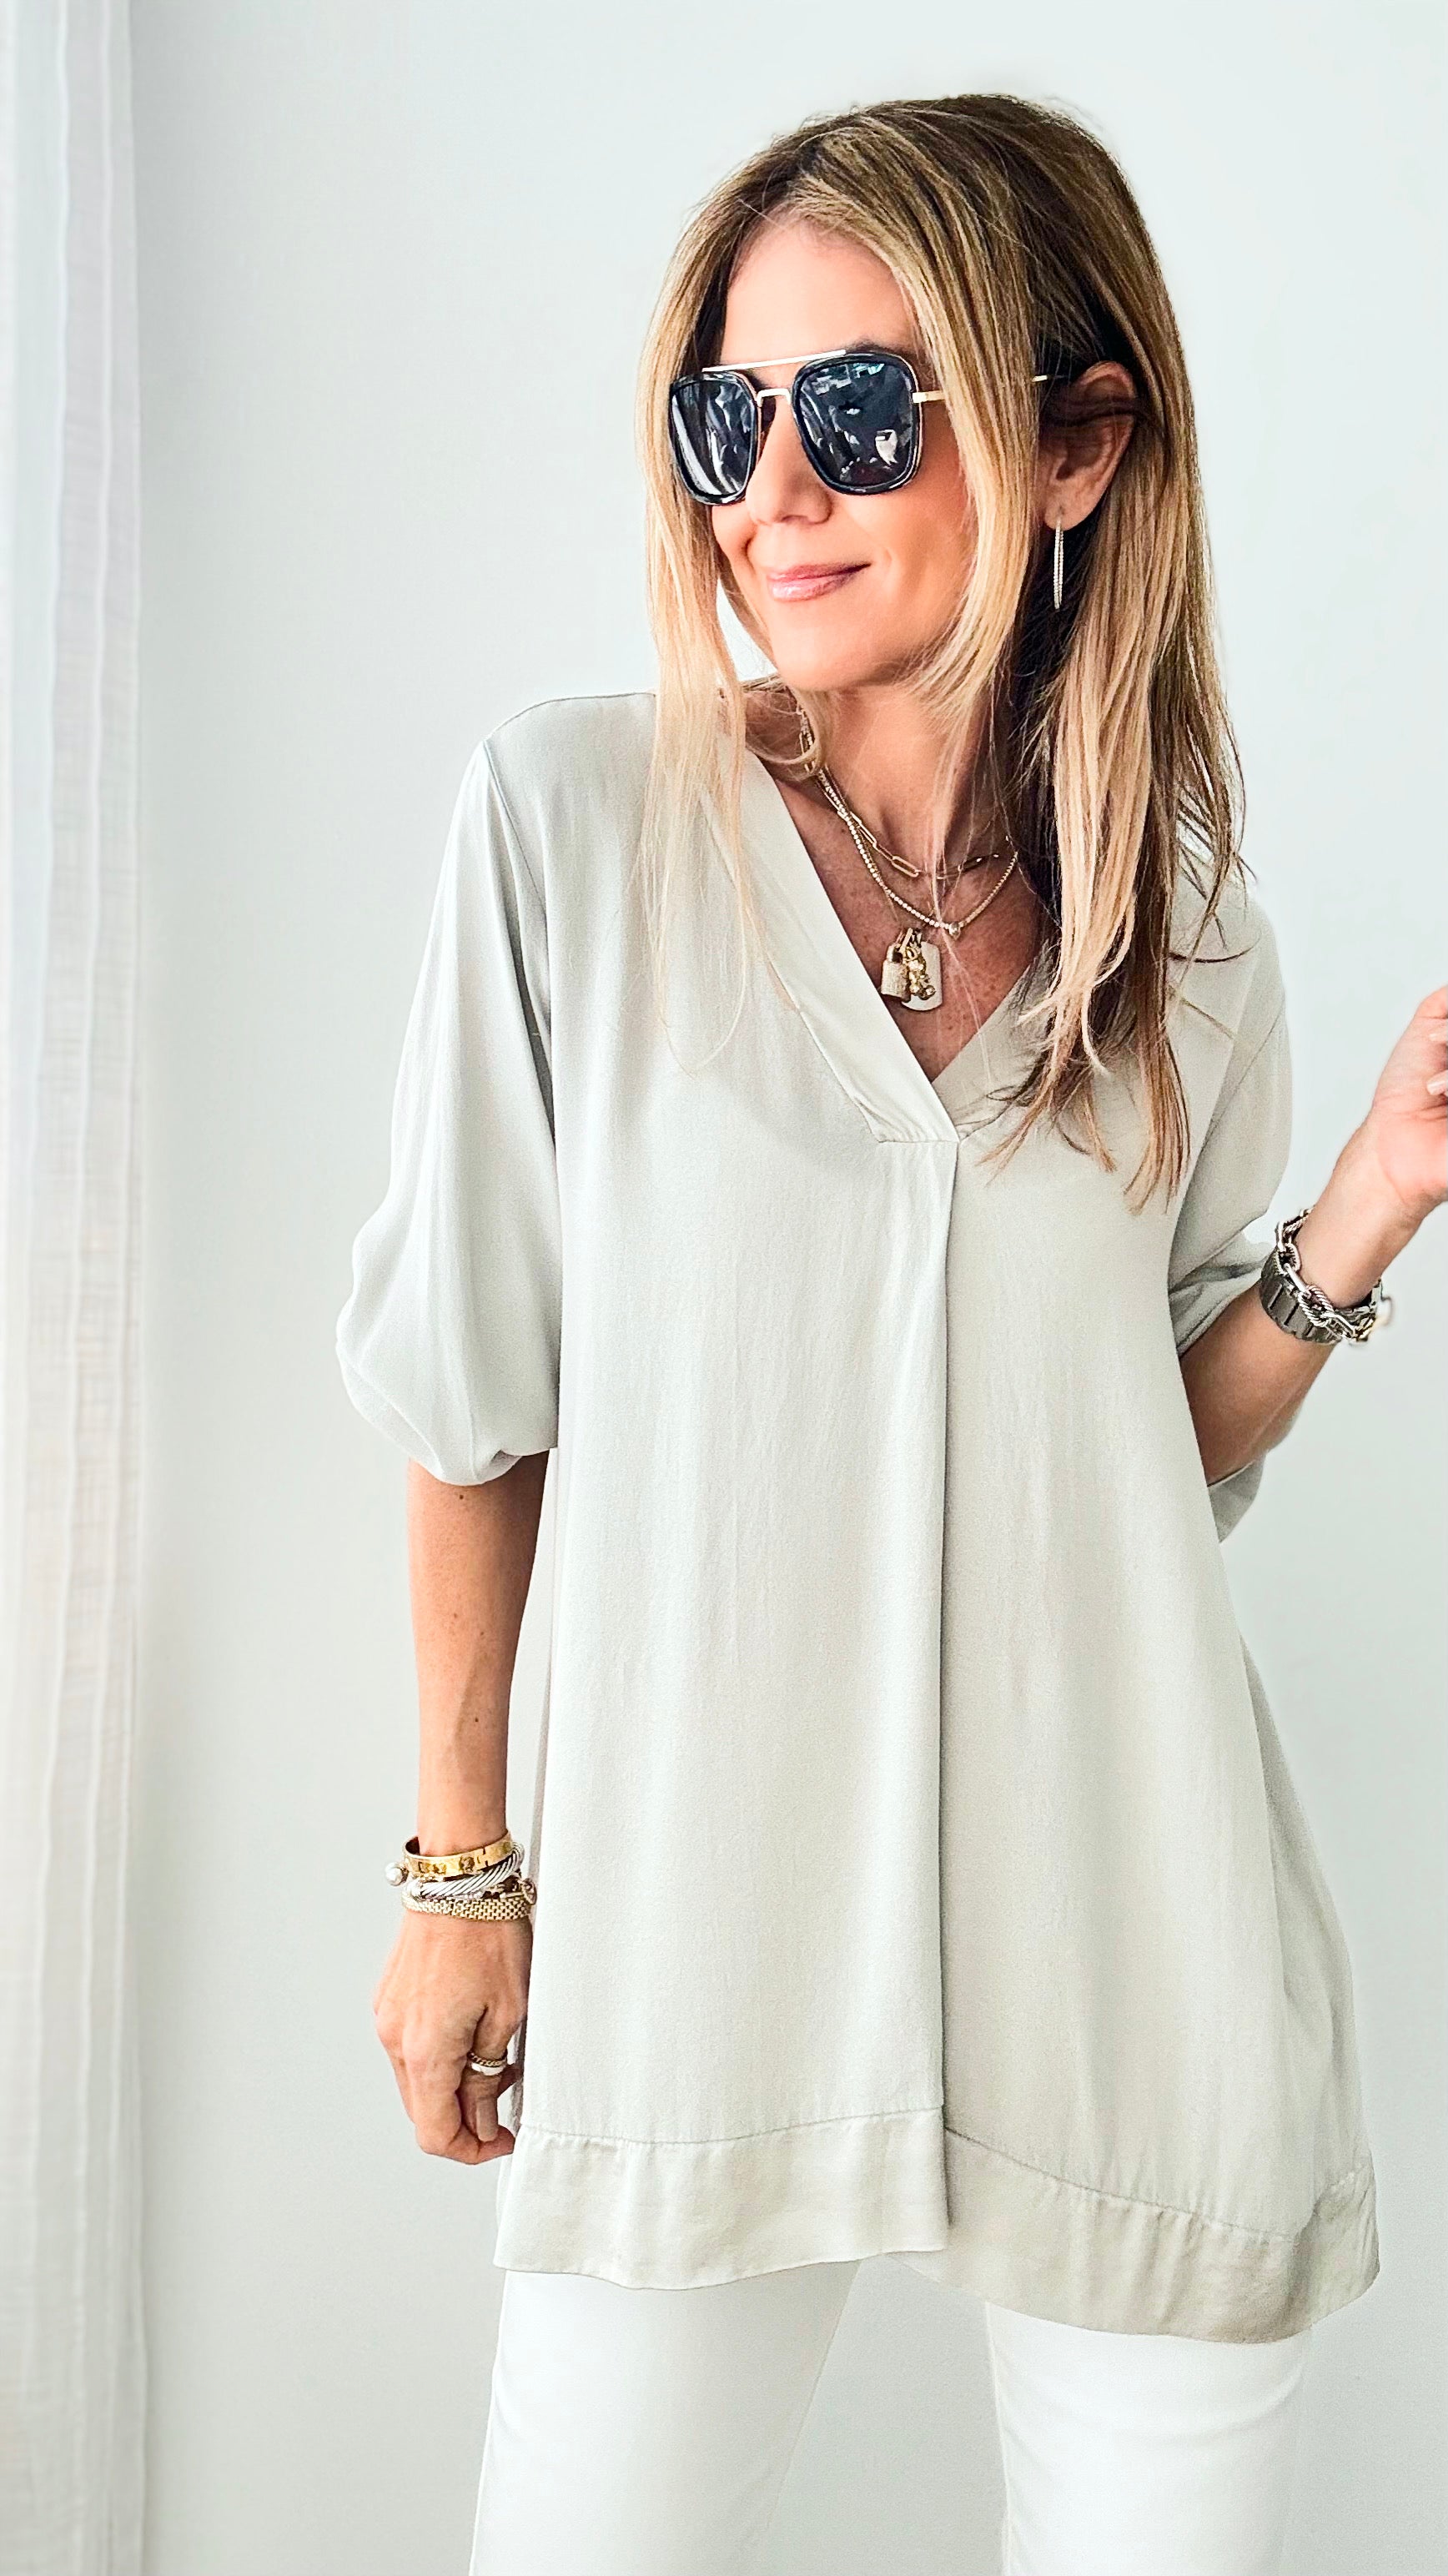 Satin Trim Italian Blouse - Light Grey-130 Long Sleeve Tops-Germany-Coastal Bloom Boutique, find the trendiest versions of the popular styles and looks Located in Indialantic, FL